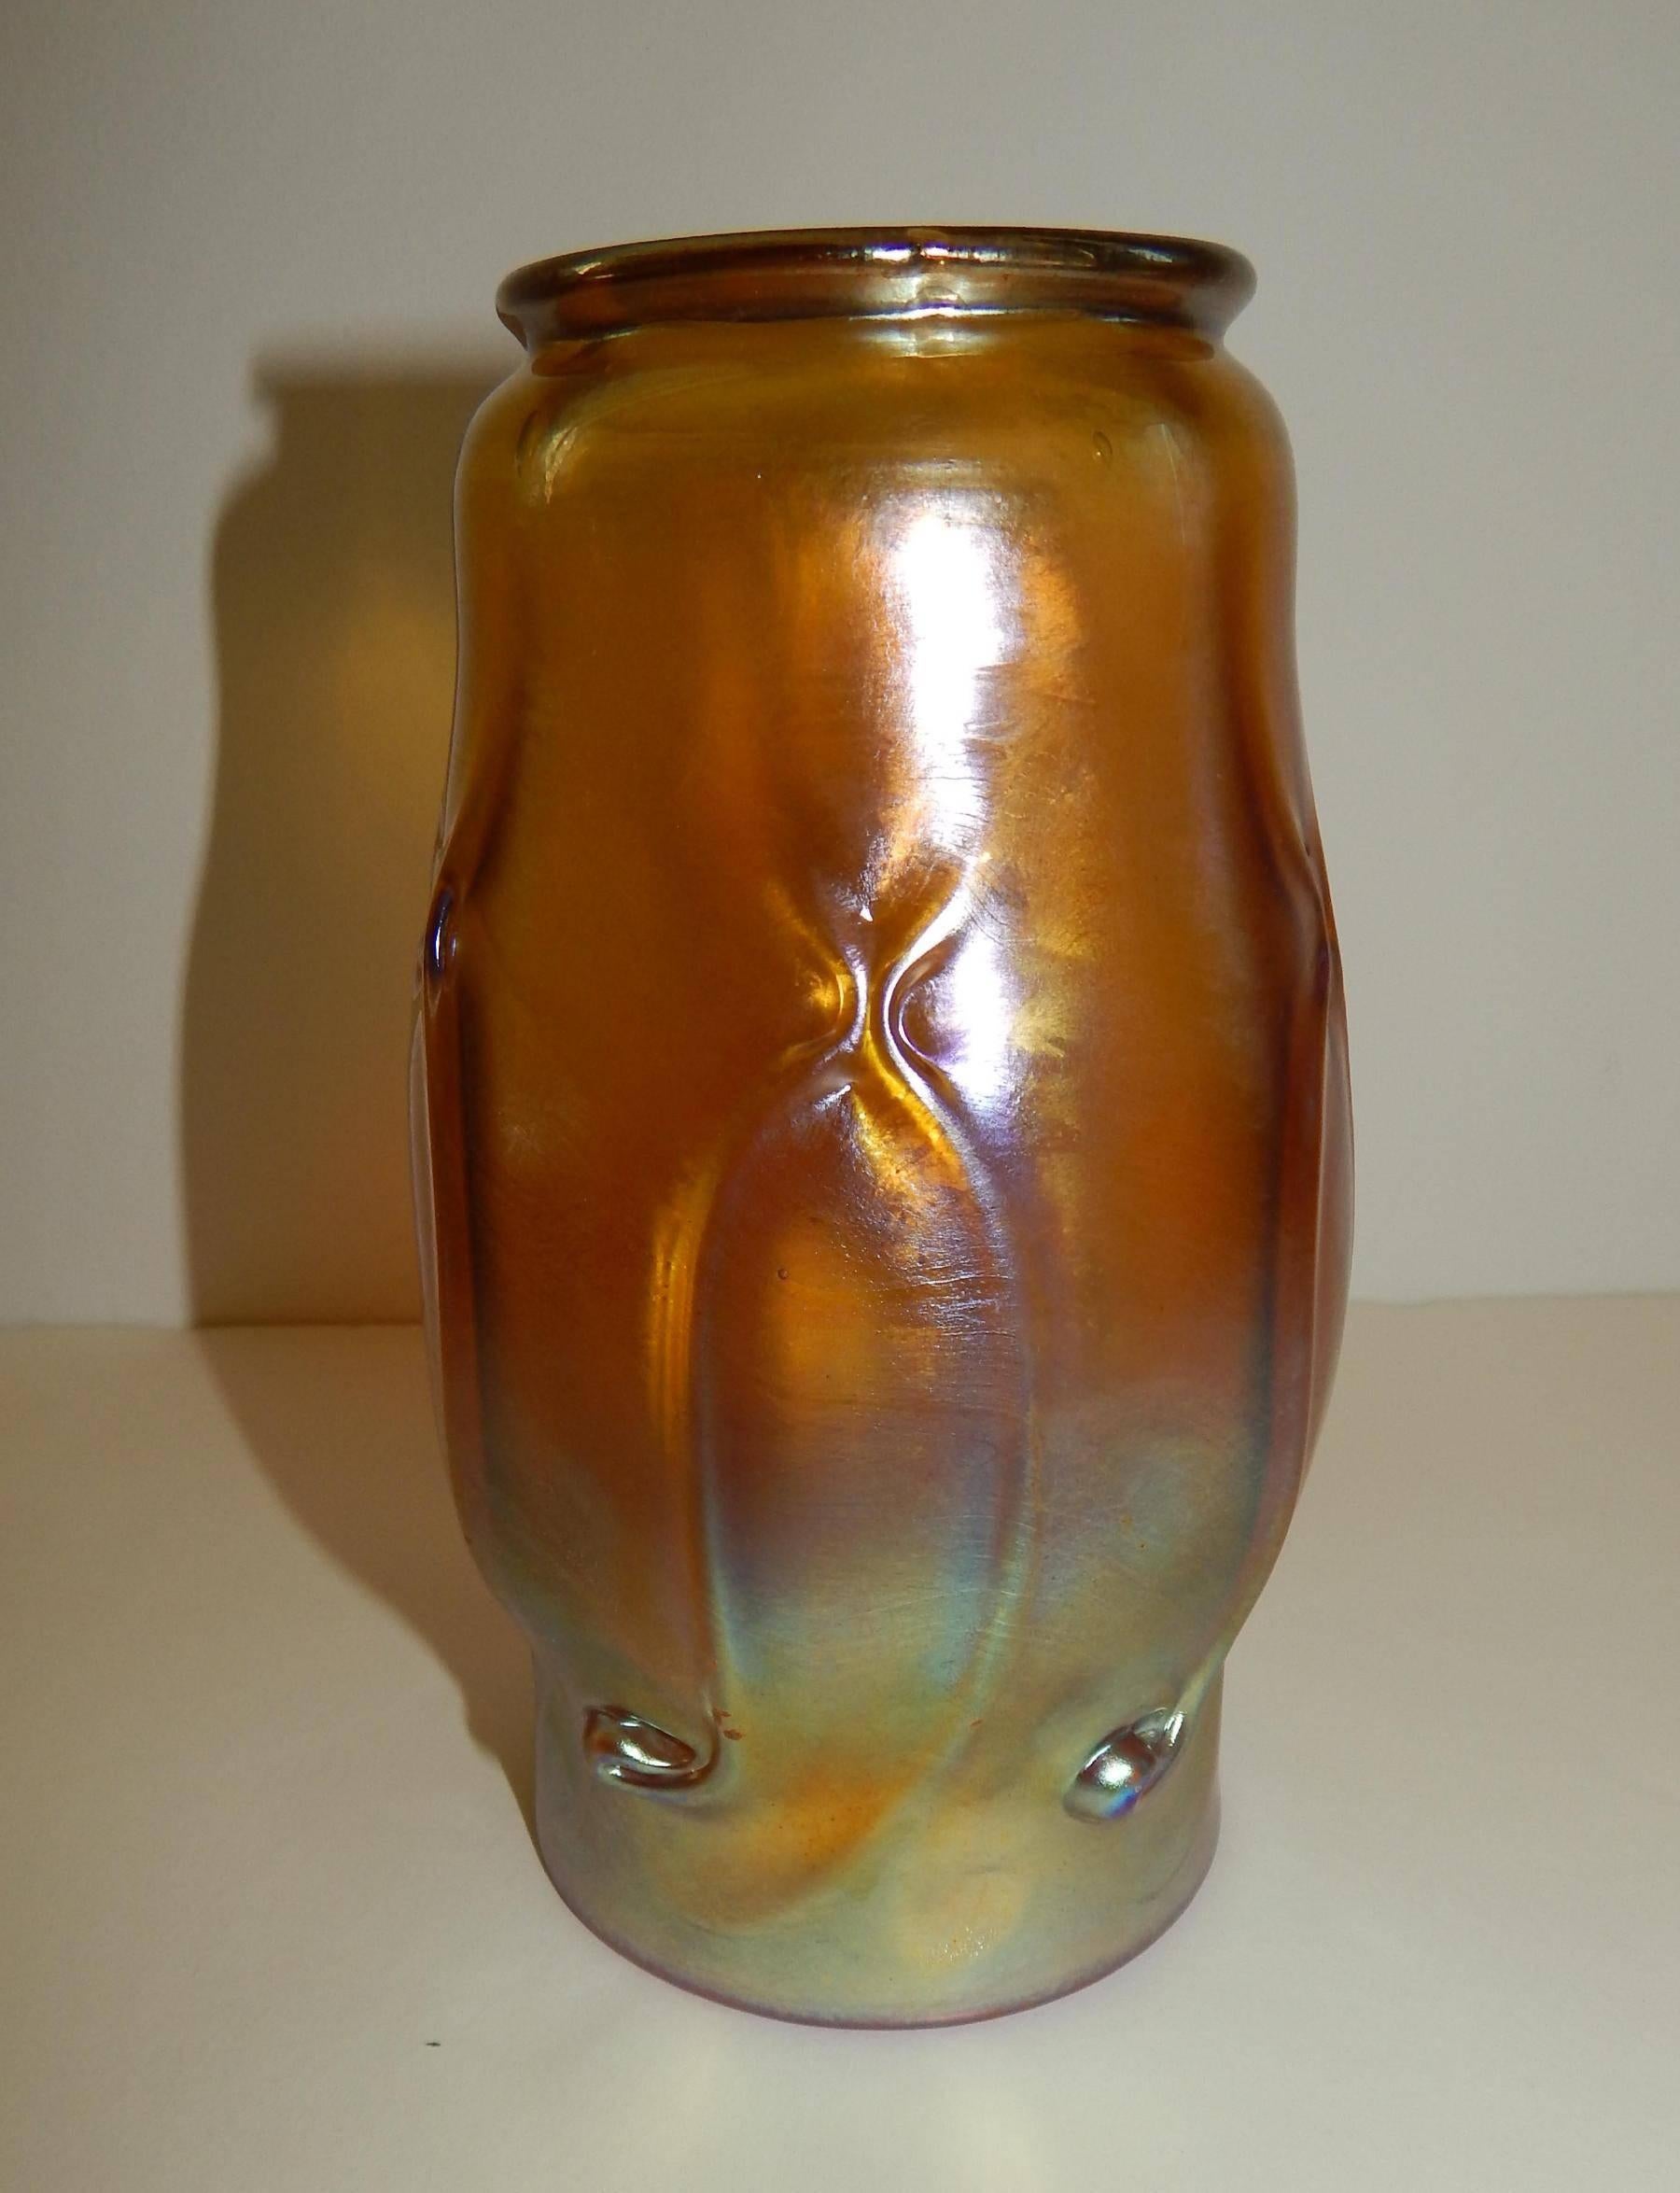 Iridized favrile vase by Tiffany Studios. 
A rich gold with highlights of pink and blue. 
Around the body of the vase are small pulls to the glass (or prunts). 
Favrile glass was patented by Louis Comfort Tiffany in 1894. 
A beautiful piece in